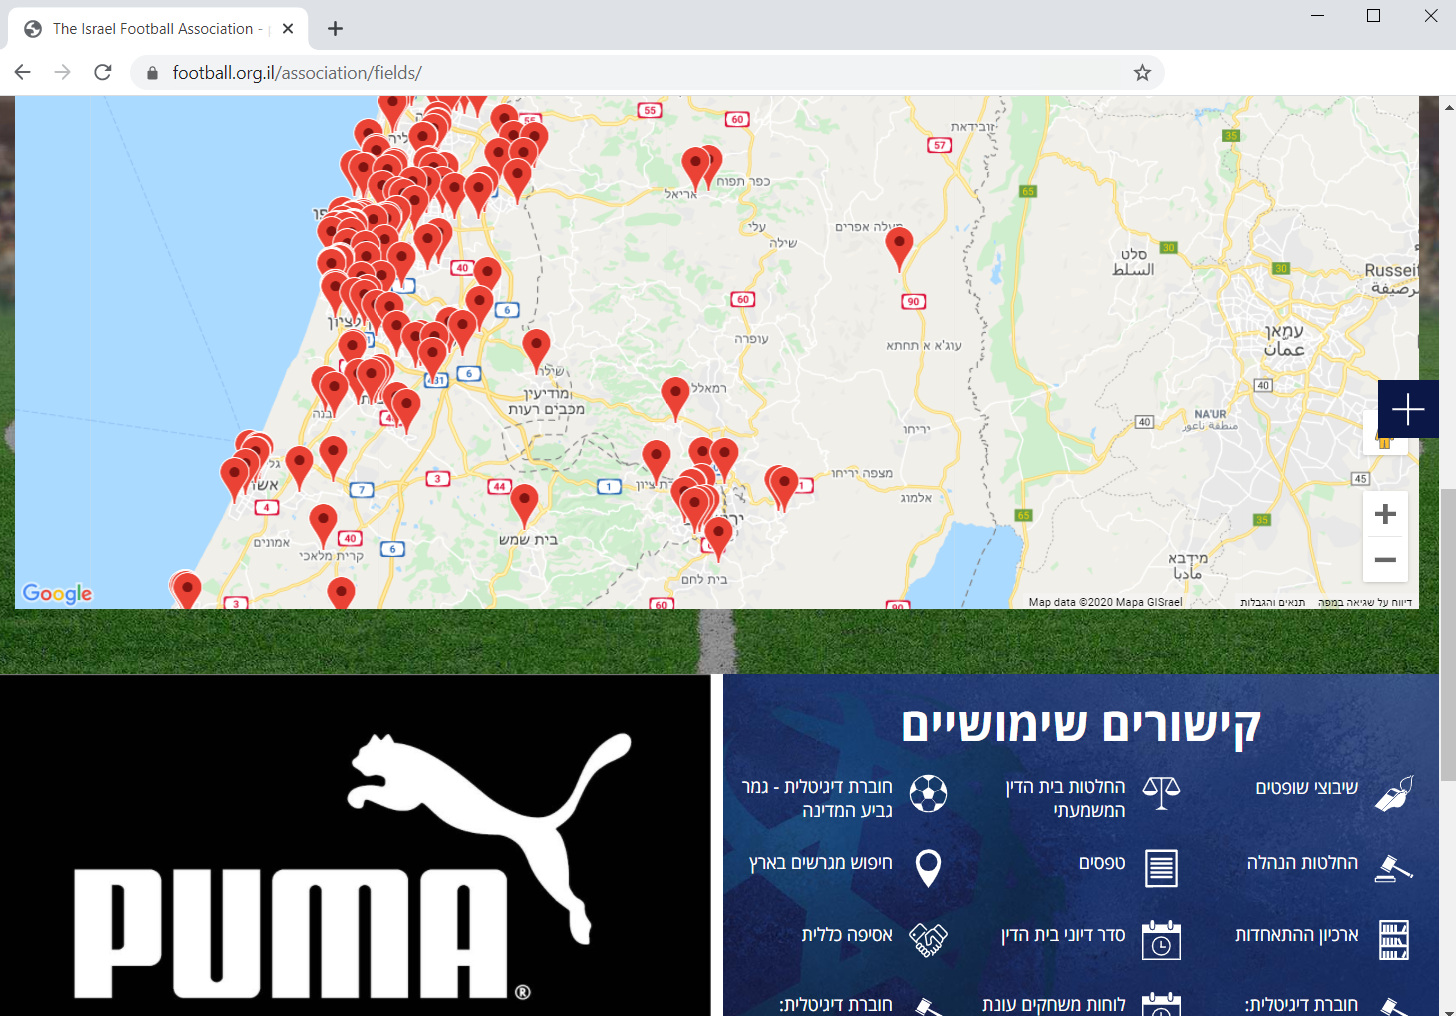 Puma's logo on the Israel Football Association's website under a map showing football facilities in illegal settlements throughout the occupied Palestinian West Bank